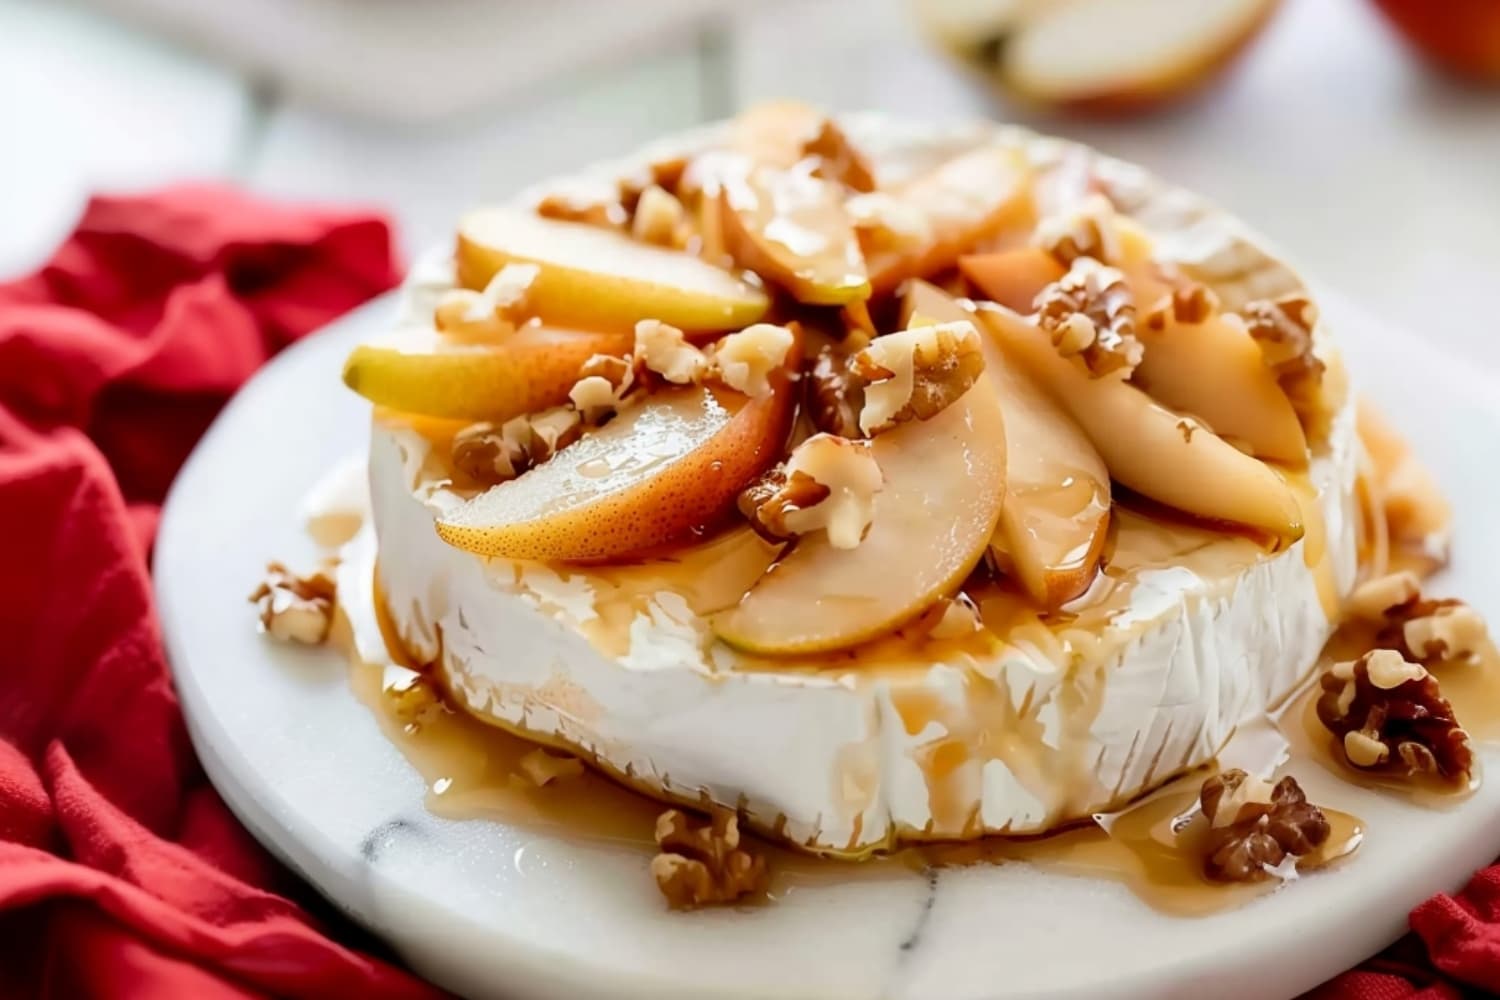 Caramelized pear and baked brie with chopped walnuts on a white marble table